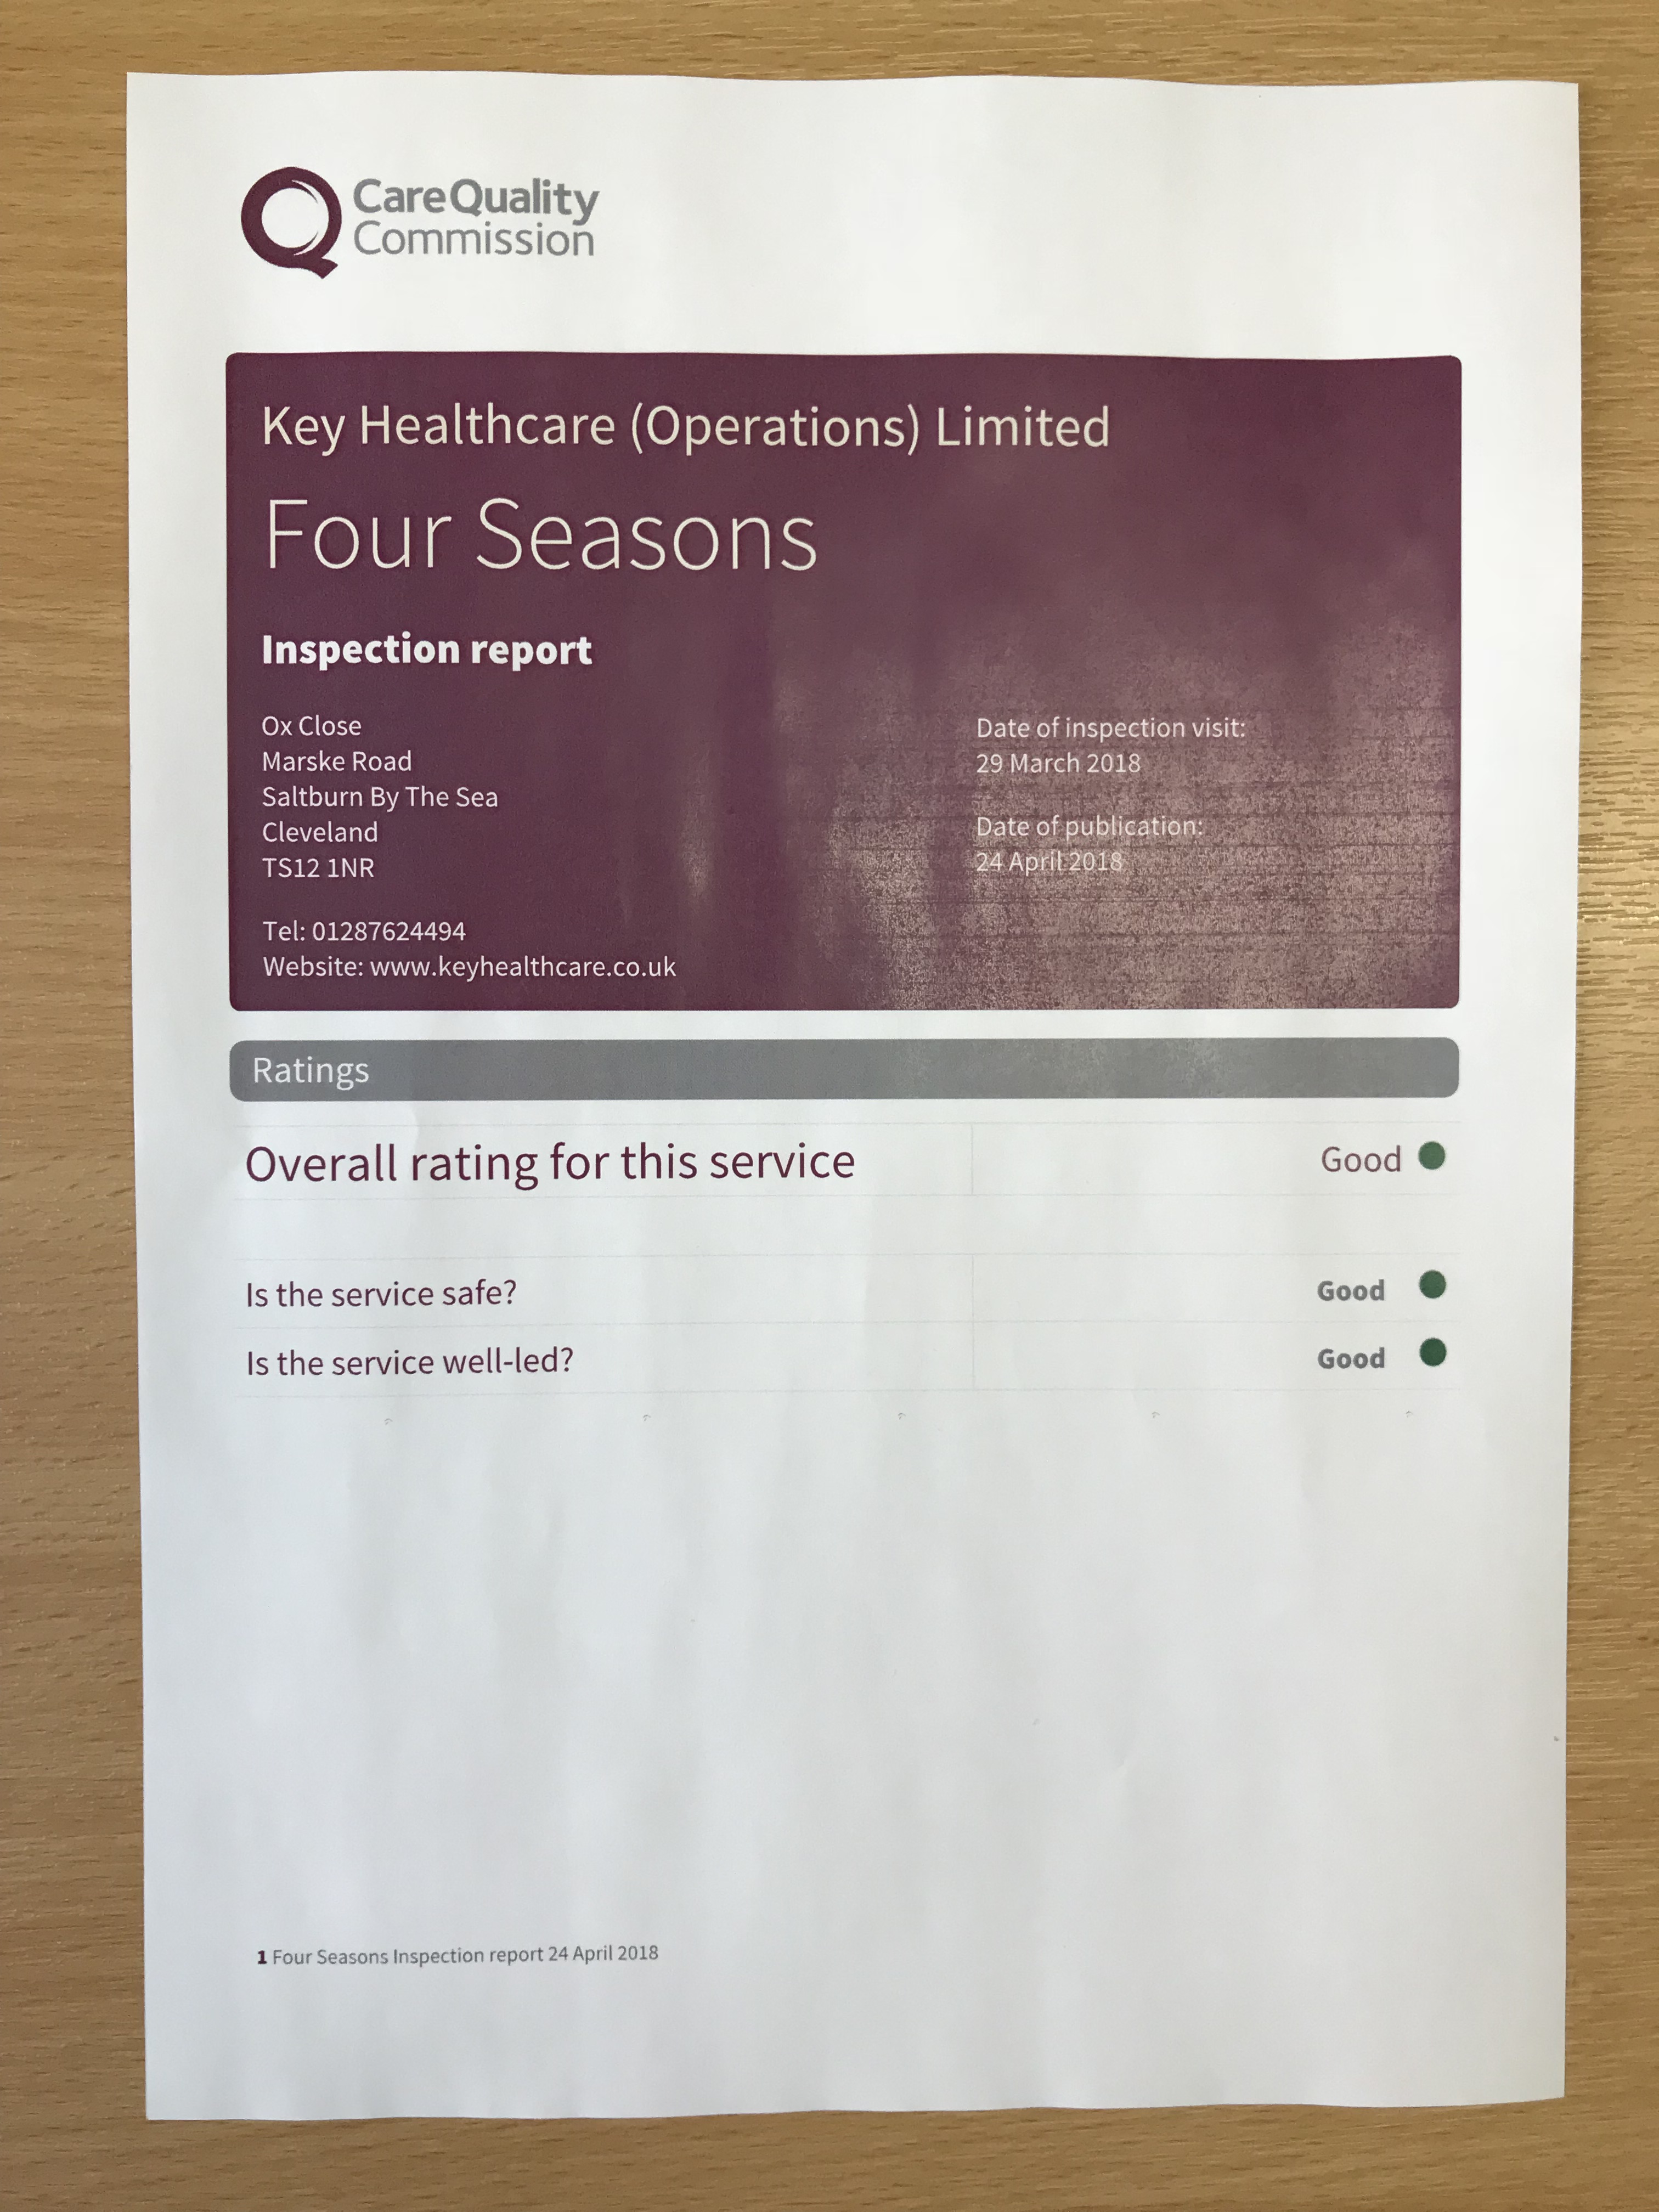 Four Seasons Care Centre CQC Inspection Report: Key Healthcare is dedicated to caring for elderly residents in safe. We have multiple dementia care homes including our care home middlesbrough, our care home St. Helen and care home saltburn. We excel in monitoring and improving care levels.